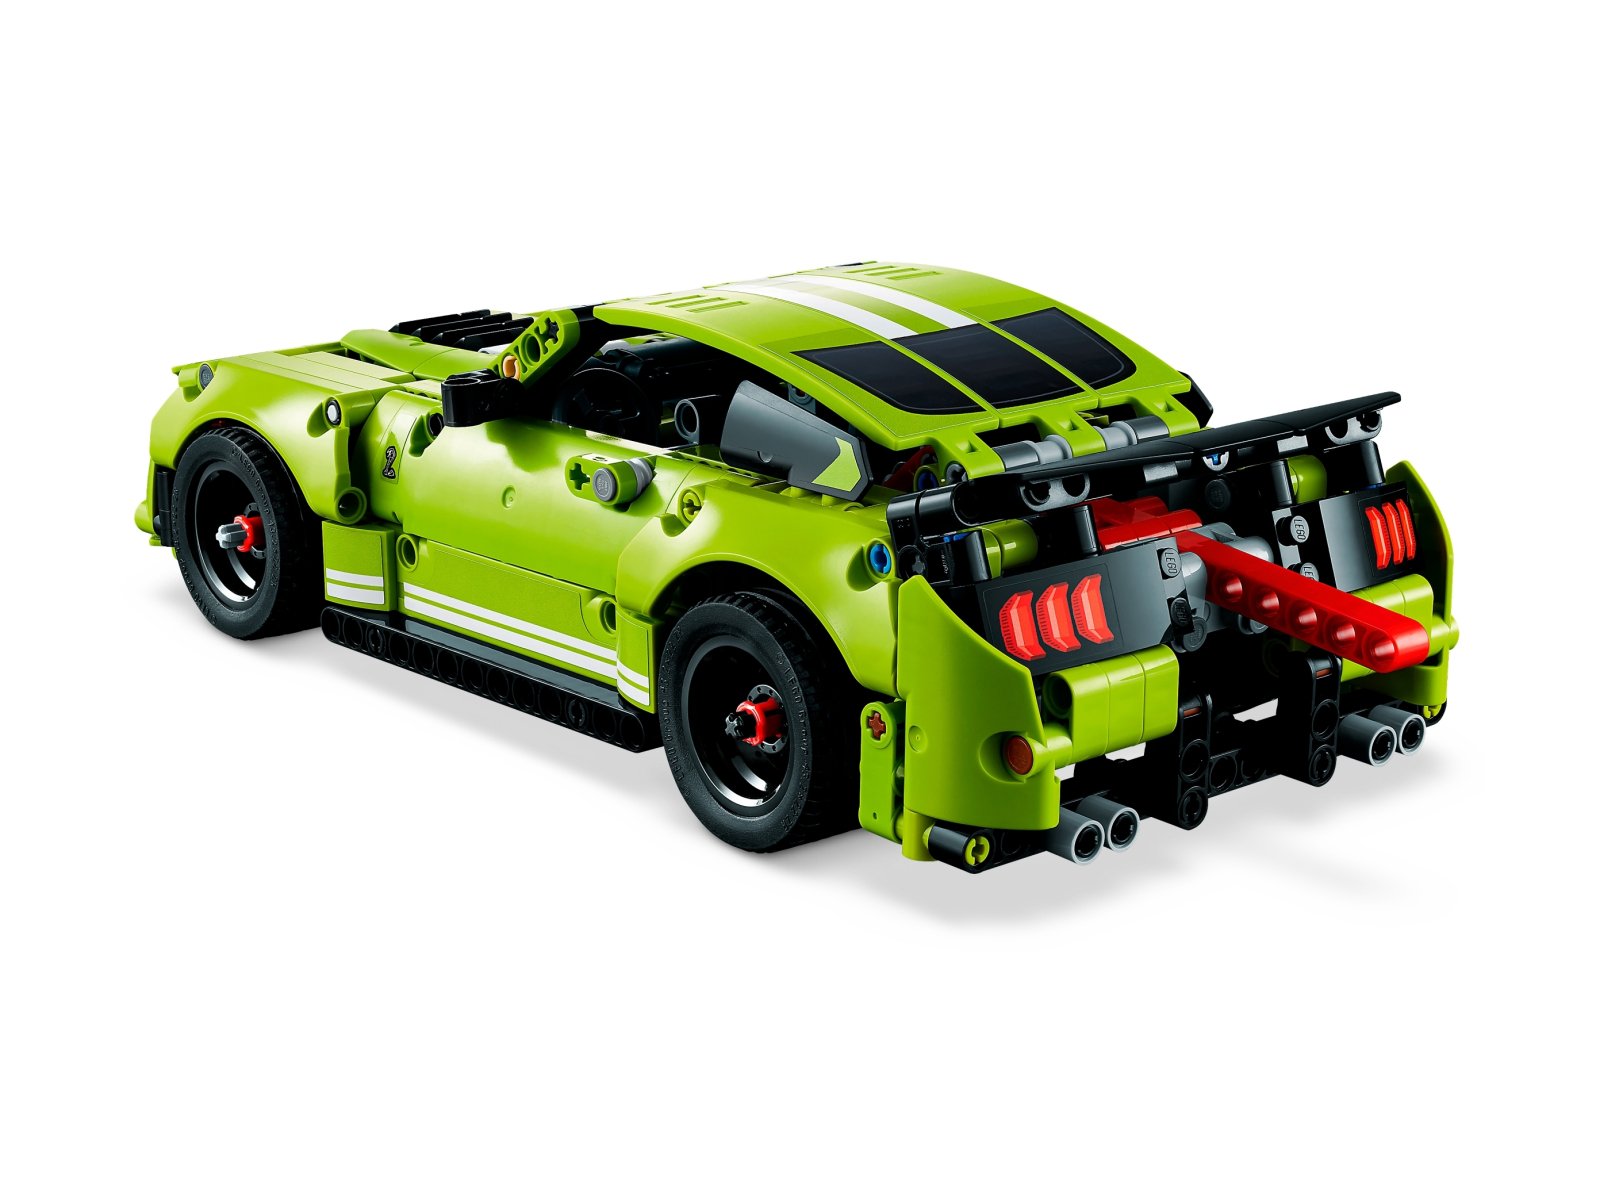 LEGO Technic Ford Mustang Shelby® GT500® 42138